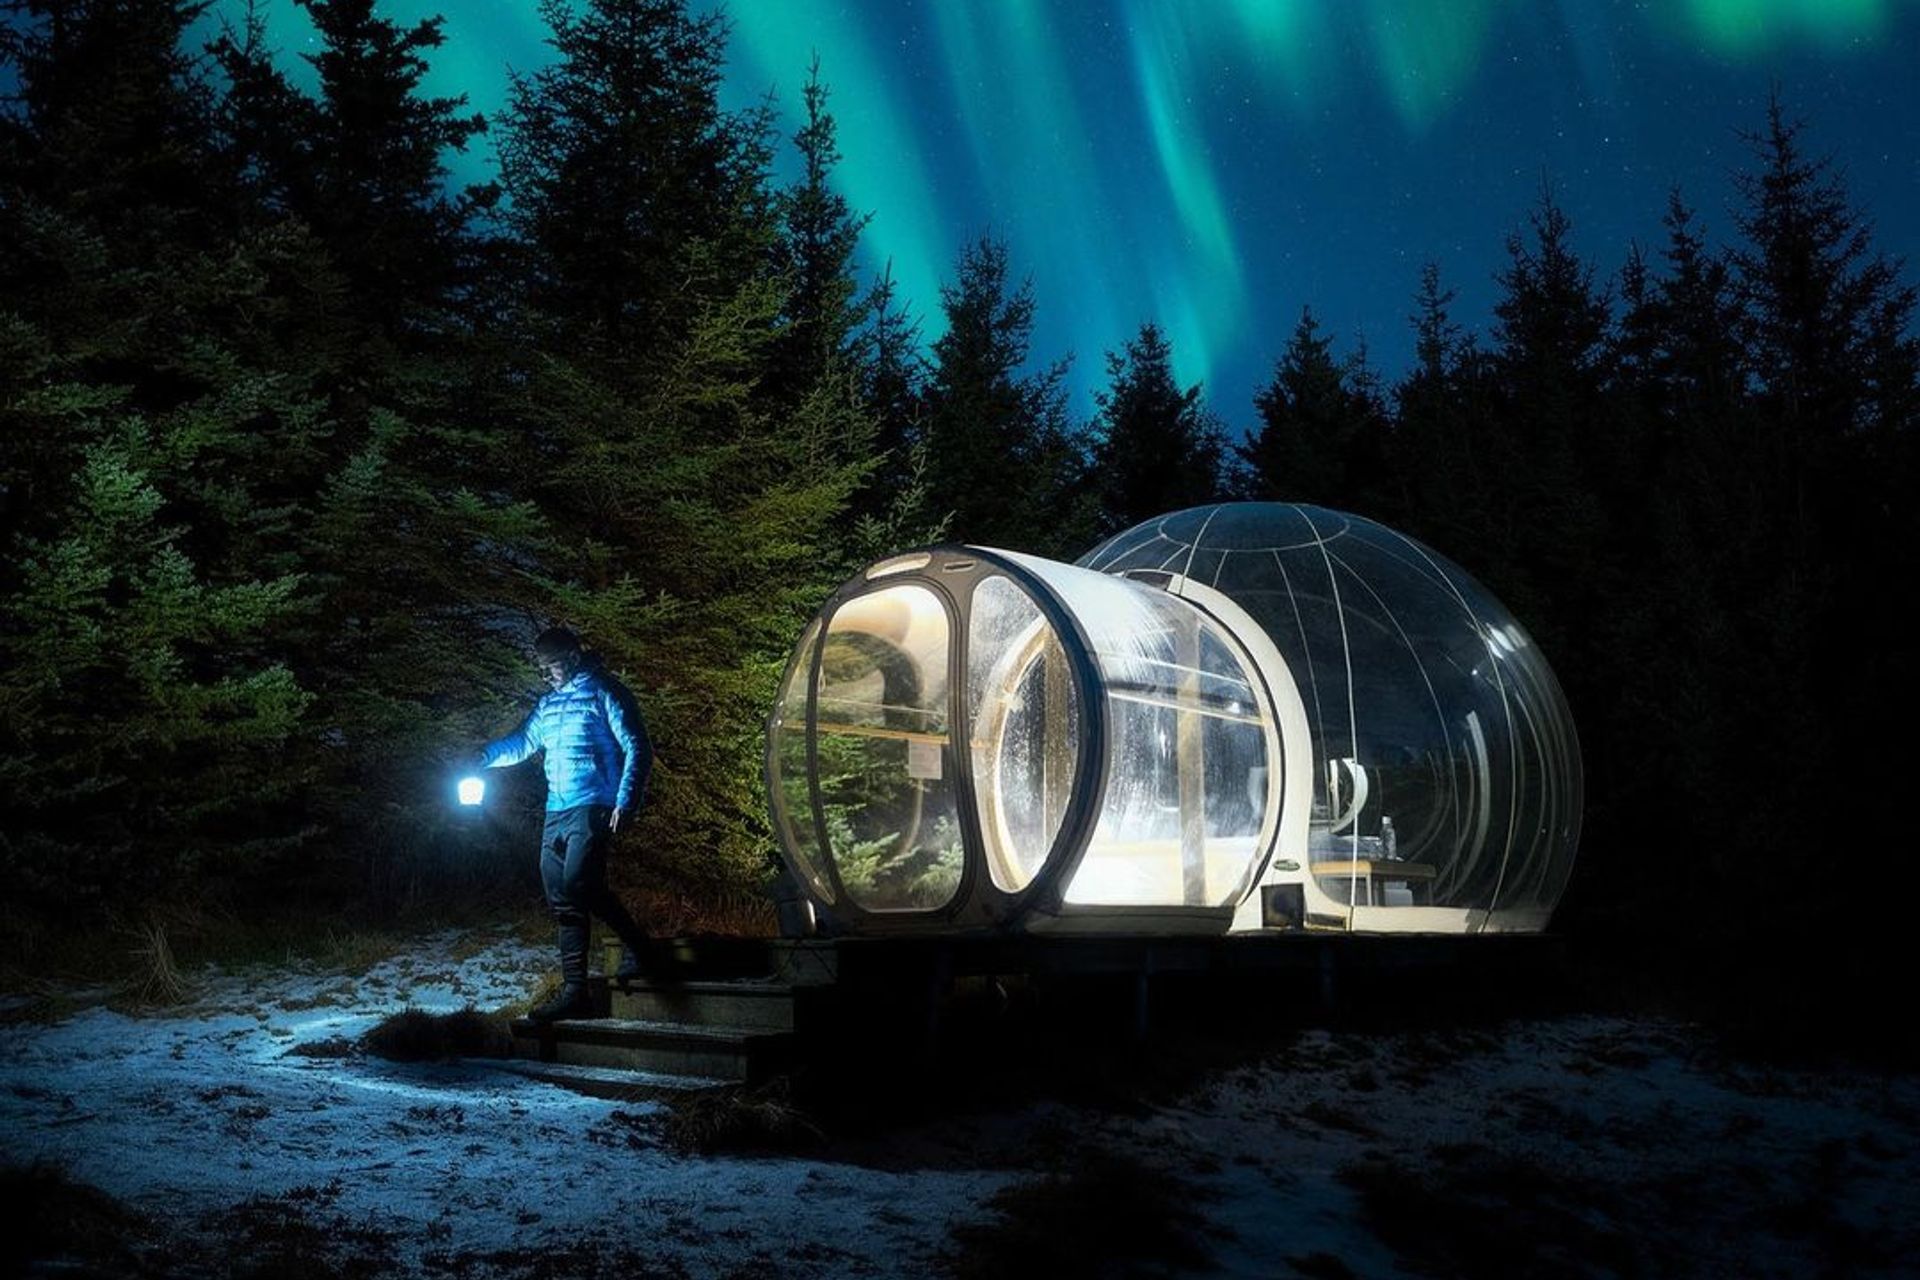 A transparent bubble tent, known as the 5 Million Star Hotel, set in the serene Icelandic wilderness under a star-studded sky.